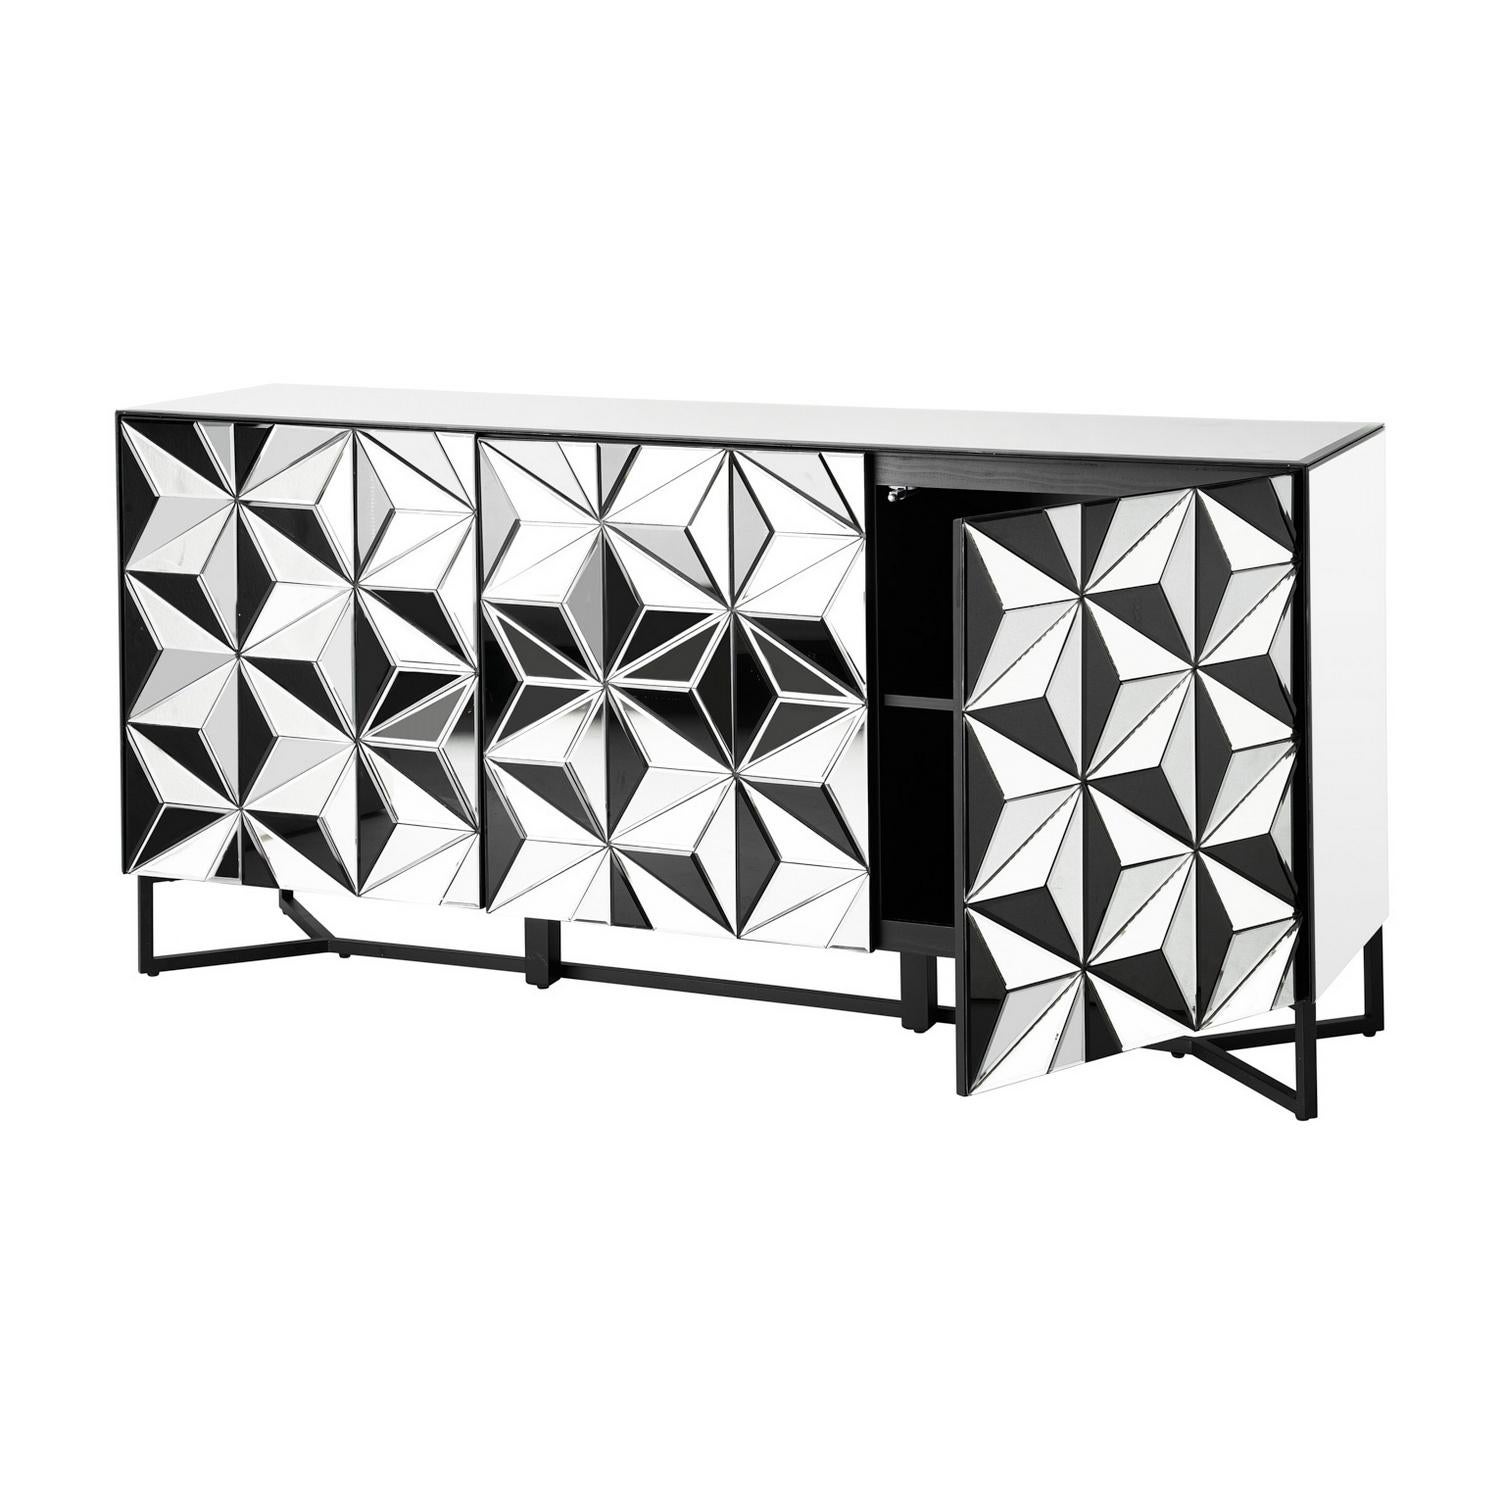 Sparkling and sophisticated bevelled mirrored sideboard with graphic mirrored doors diamond and brutalist shaped panels opening on shelves and aerial black lacquered feet. Tray and sides are mirrored too!